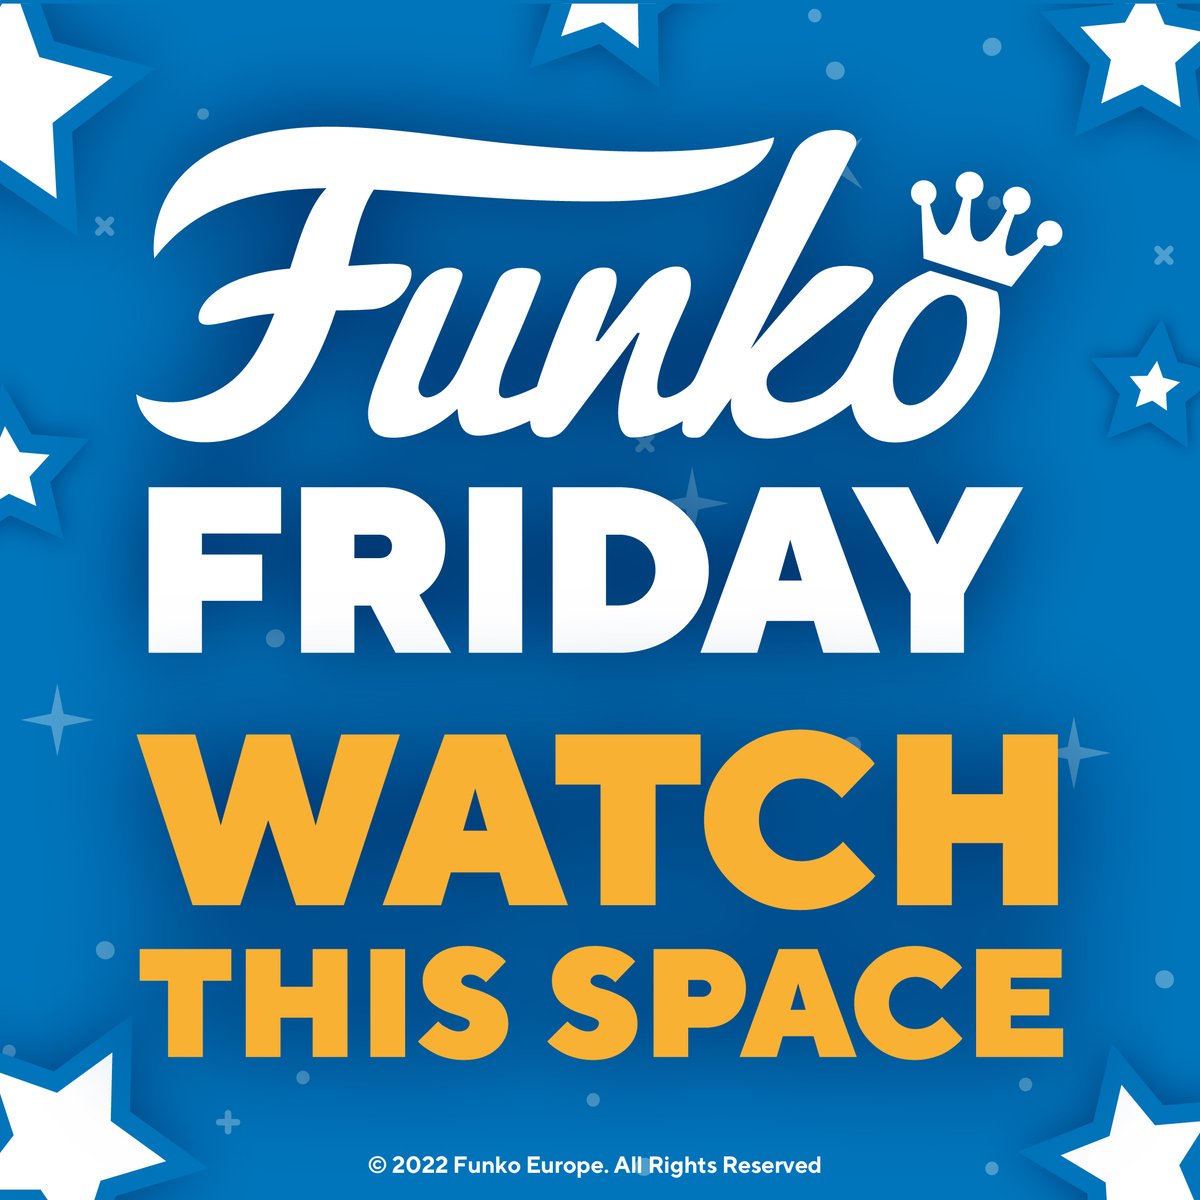 Psstt... Funko Fans! Come back tomorrow when we'll reveal a special Funko Friday treat🤫 What do you think it will be?👀